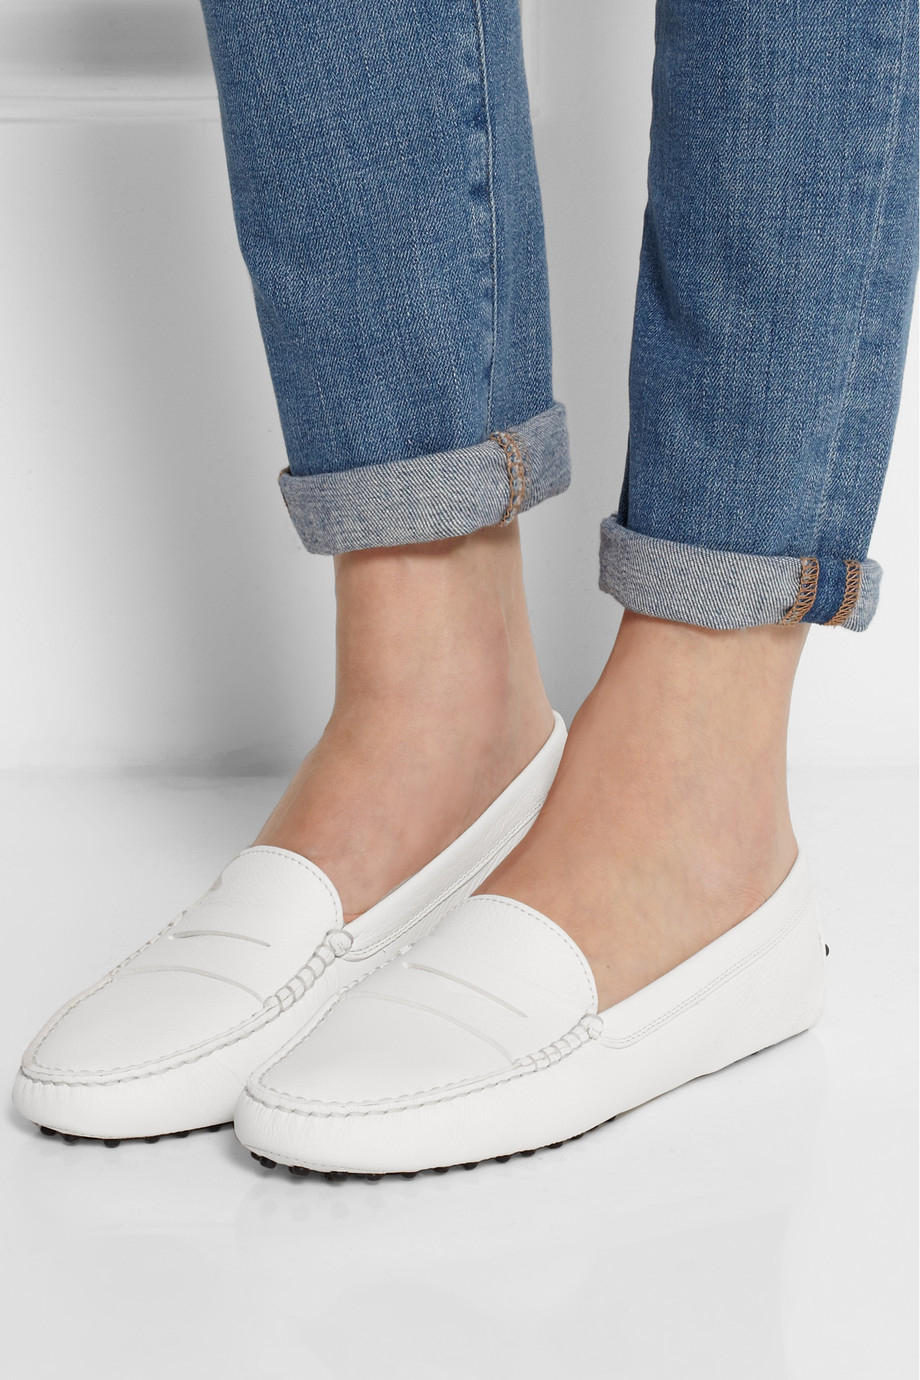 tods white loafers